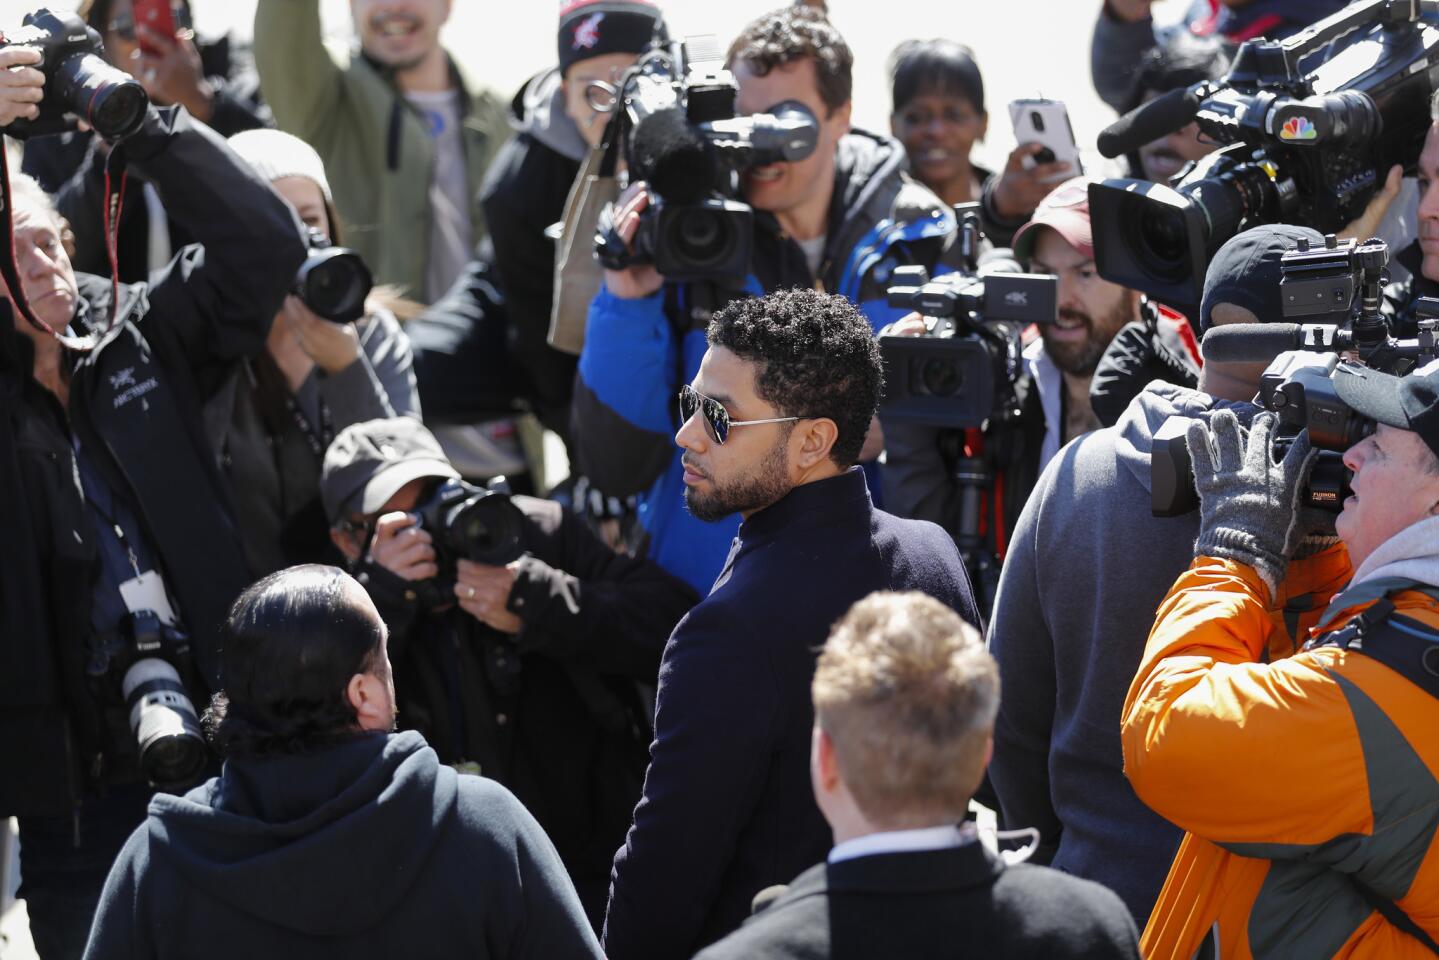 Jussie Smollett is surrounded by the media as he waits for his car to pick him up after all charges against him are dropped at the Leighton Criminal Court Building in Chicago on March 26, 2019.